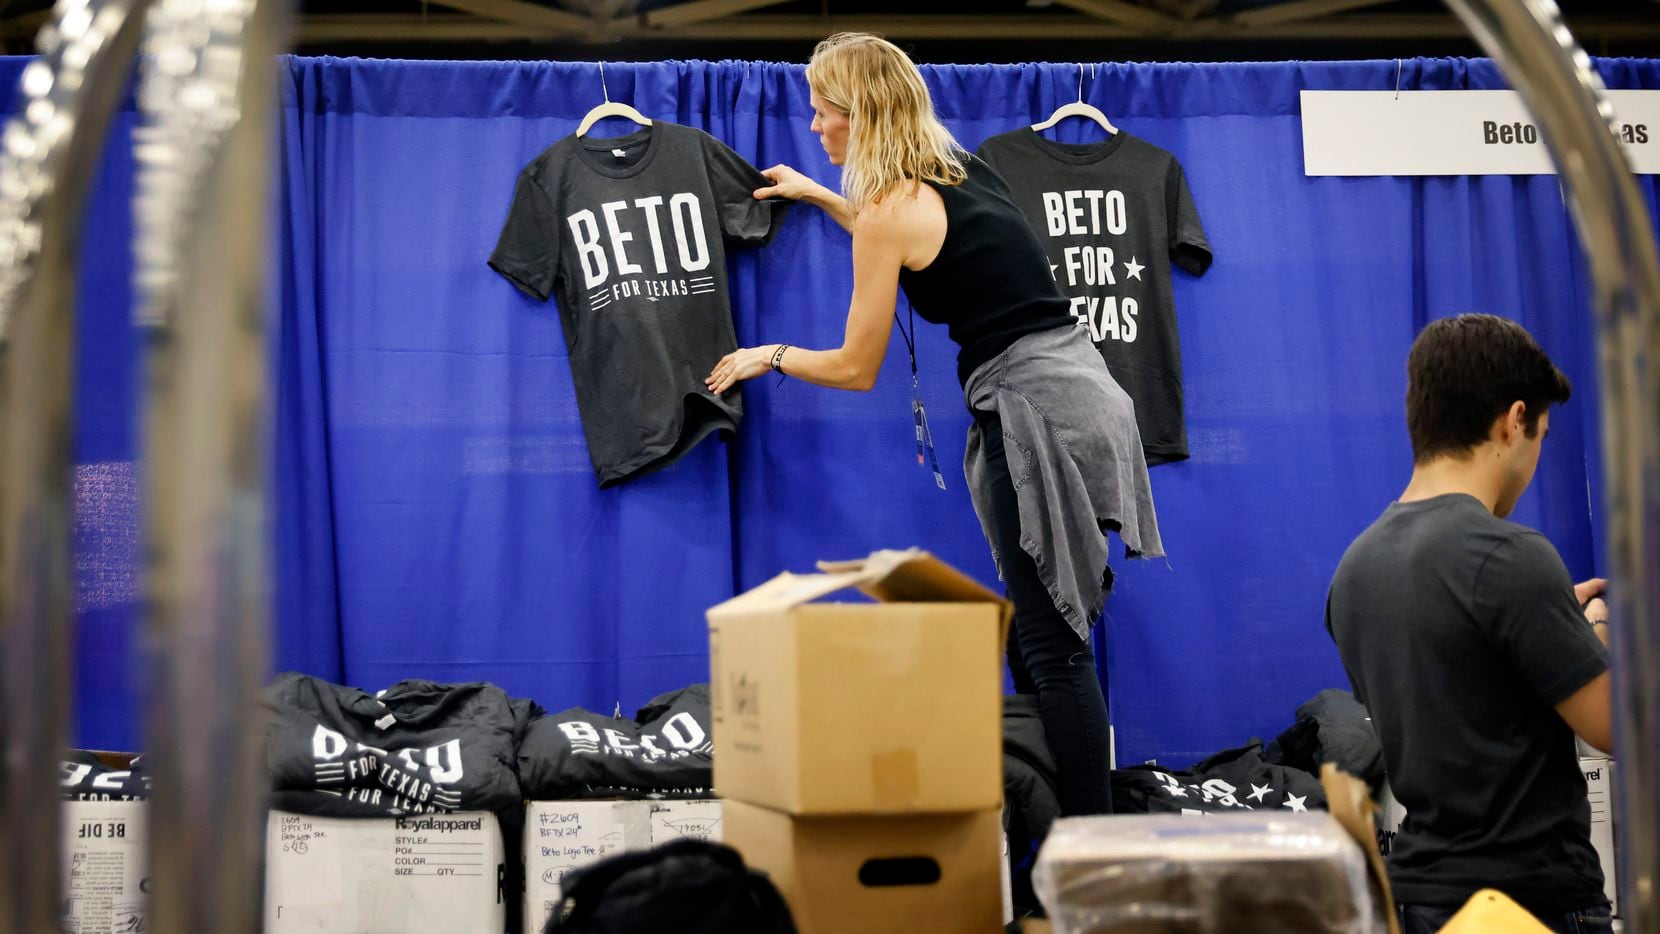 Staffer Chrissy Kleberg hangs up Beto For Texas t-shirts at his booth as the team set up on...